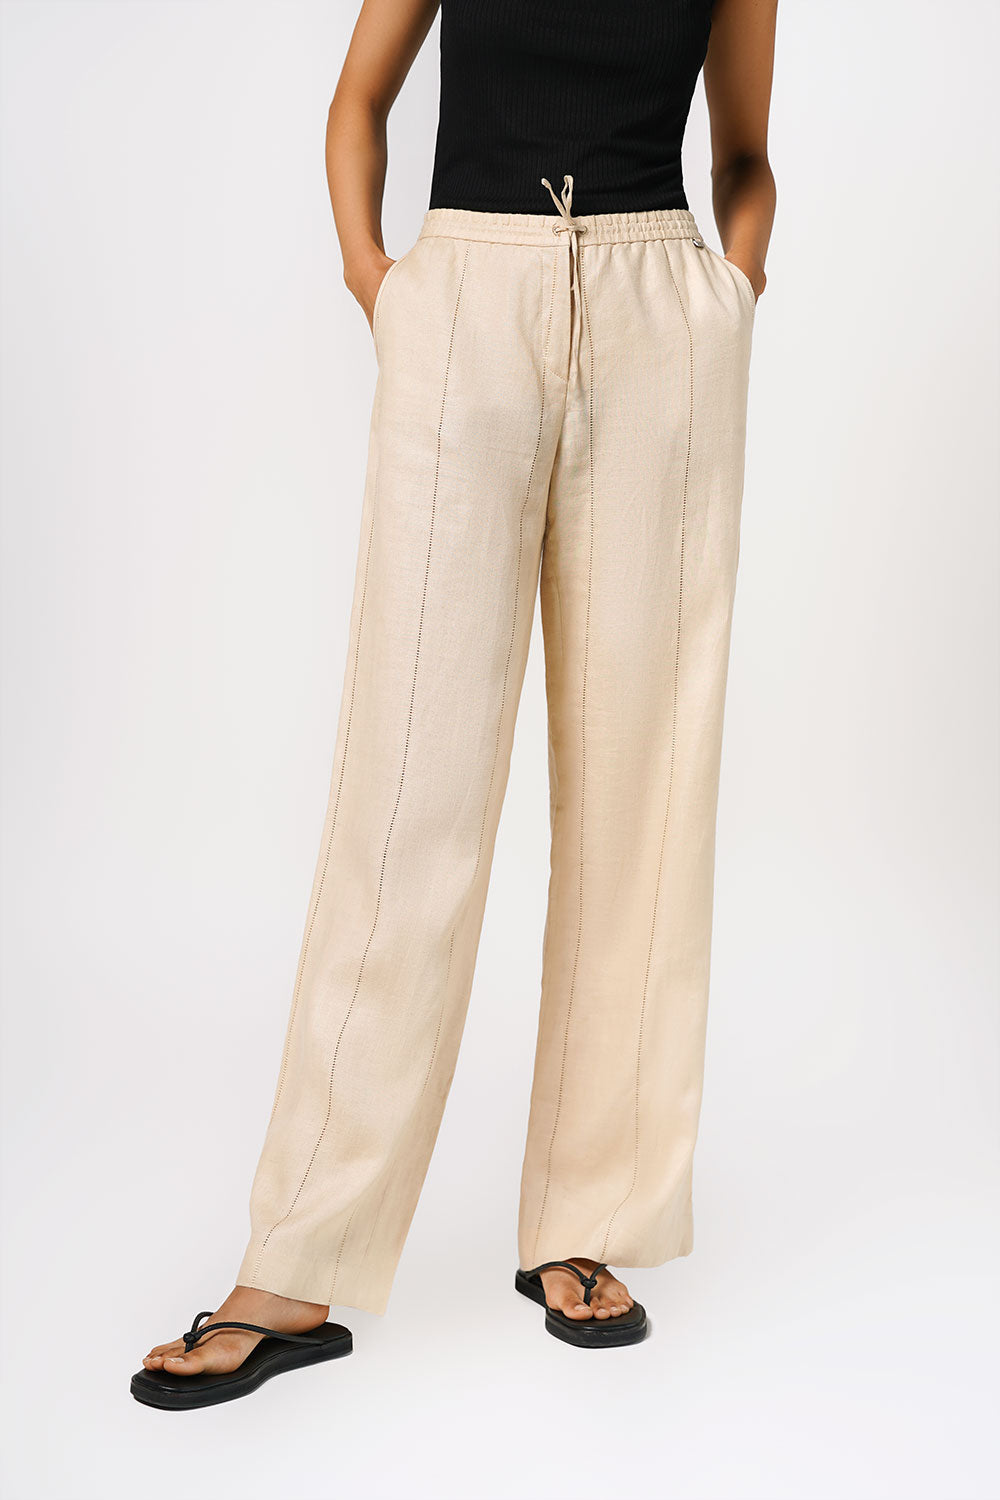 Escada Sport Relaxed Cotton Trousers With Cut Out Detail Size S